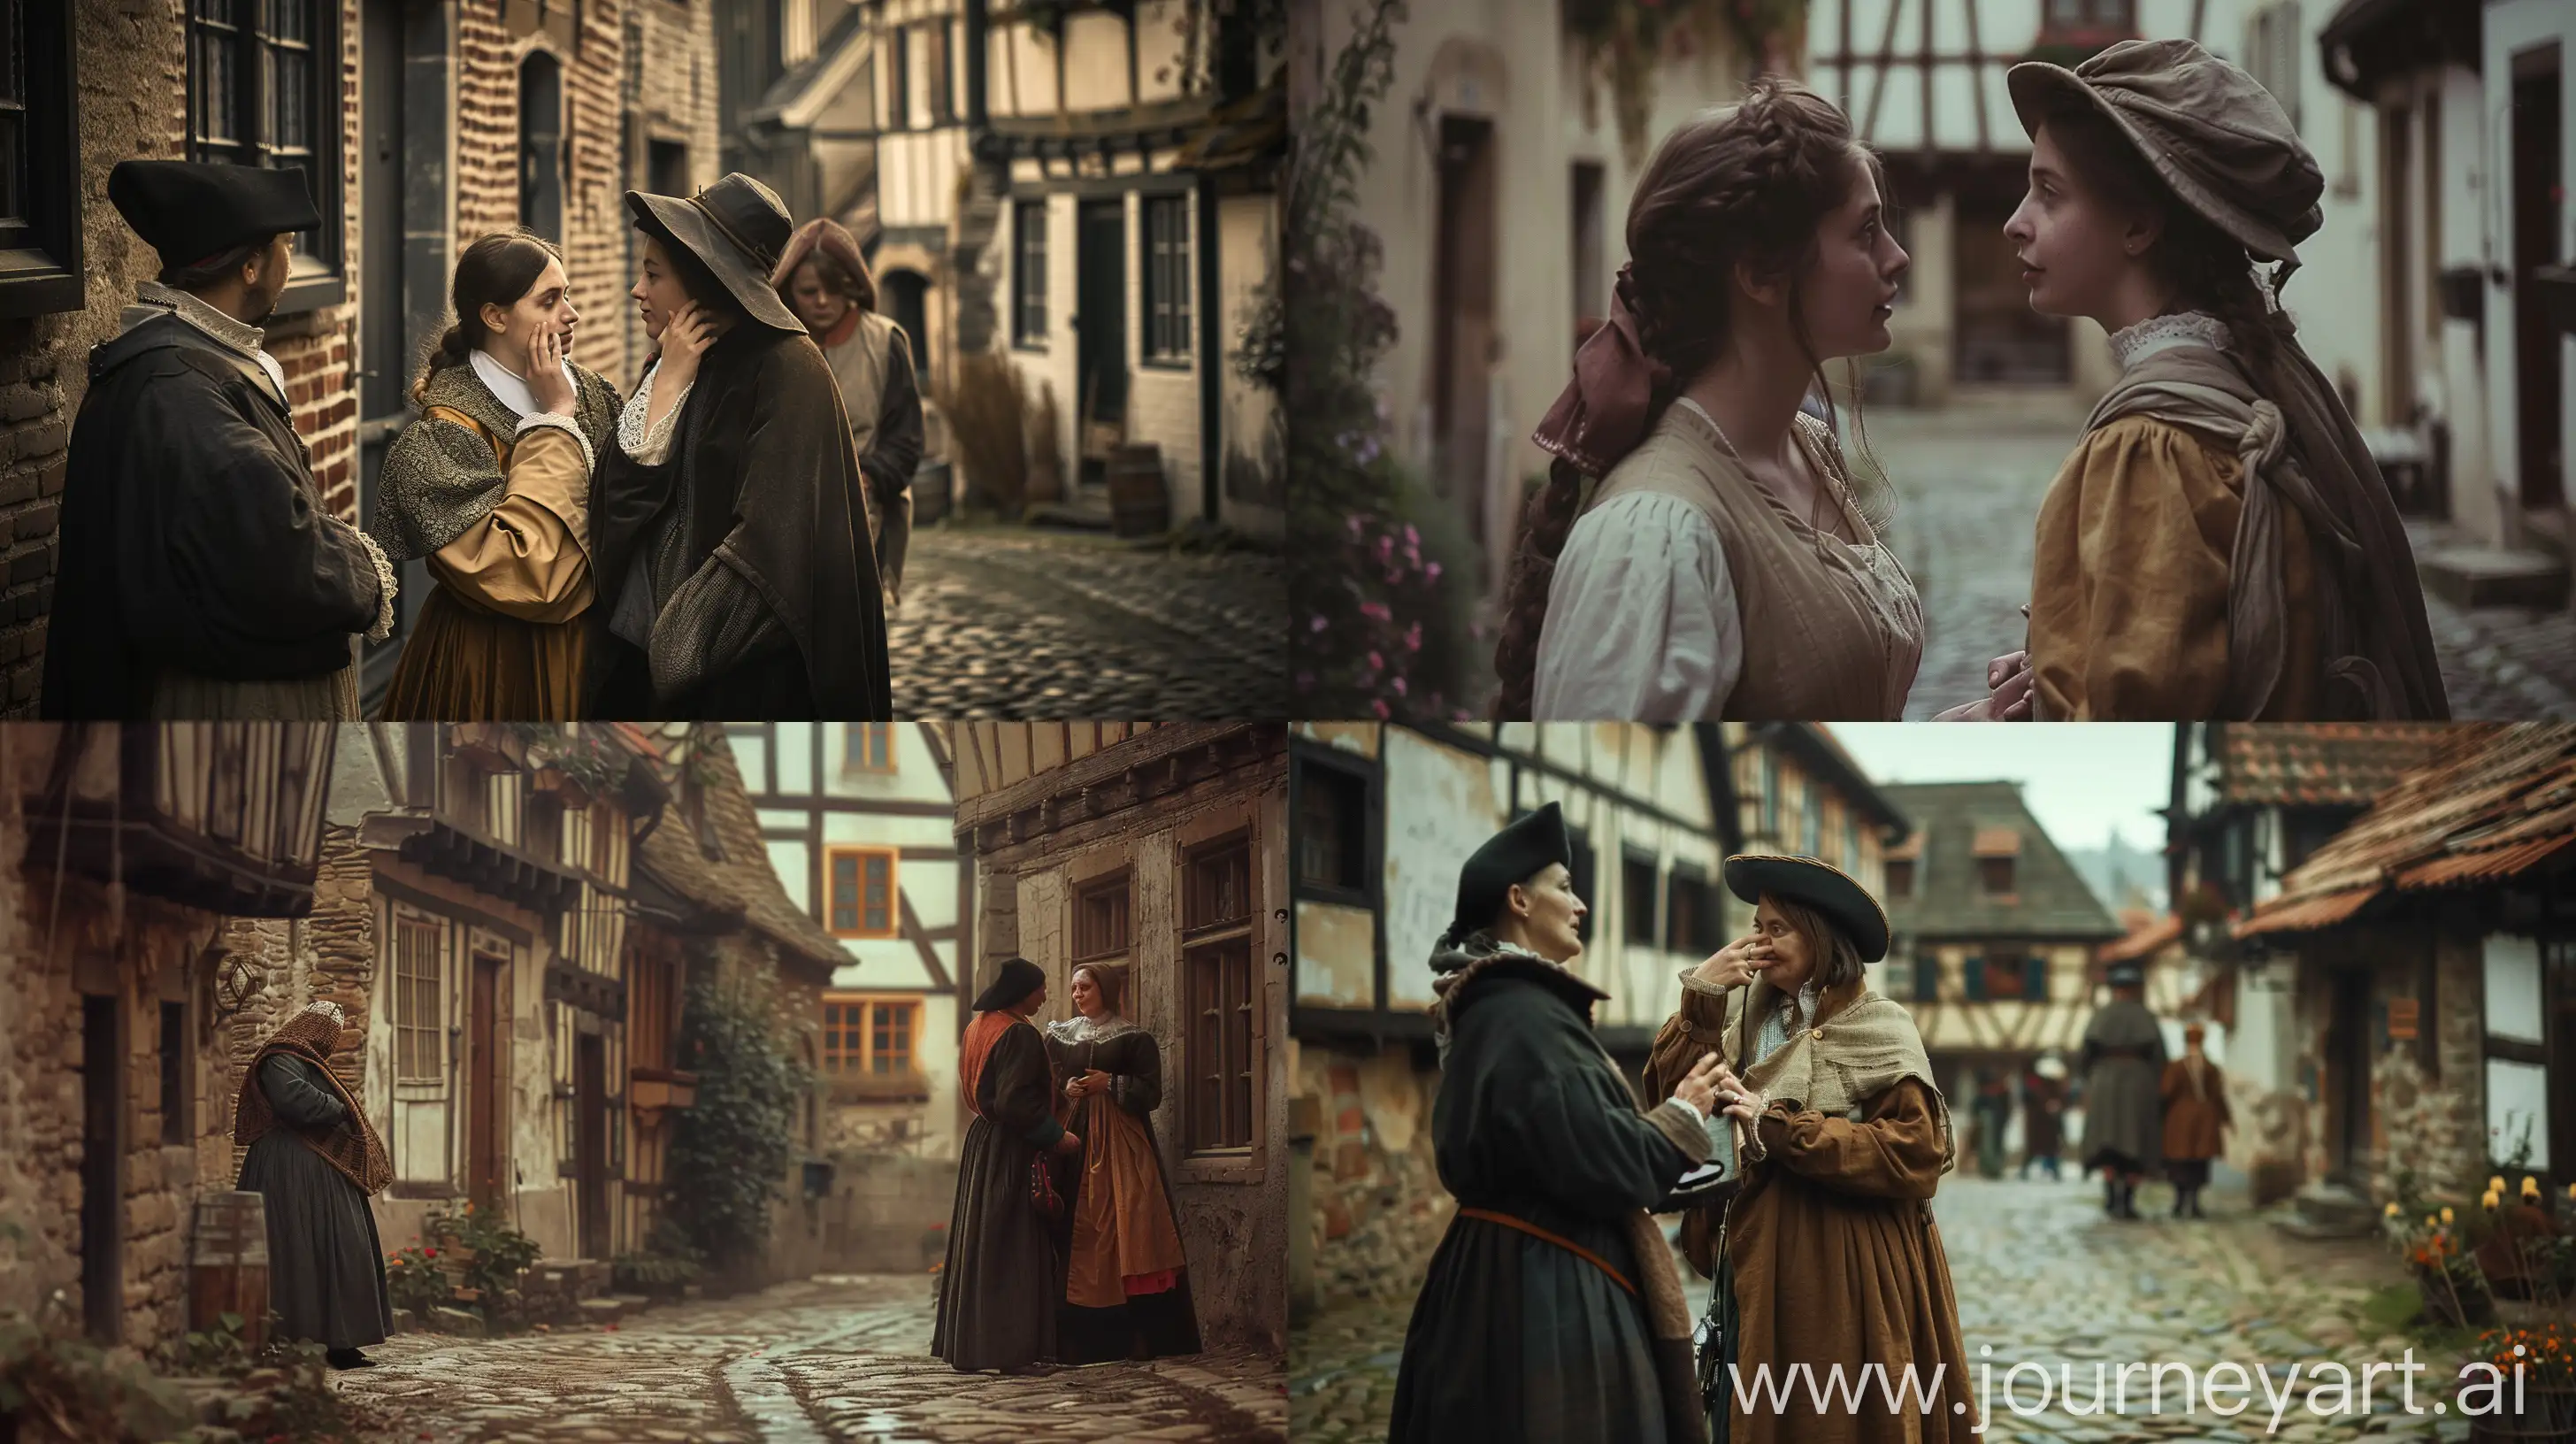 16th century style scene, townsfolk whispering secrets, high depth of field, intimate conversation, cobblestone streets, rustic buildings, vintage attire, reminiscent of Vermeer's lighting and composition, subtle expressions, candid capture, historical photography aesthetic --ar 16:9 --v 6